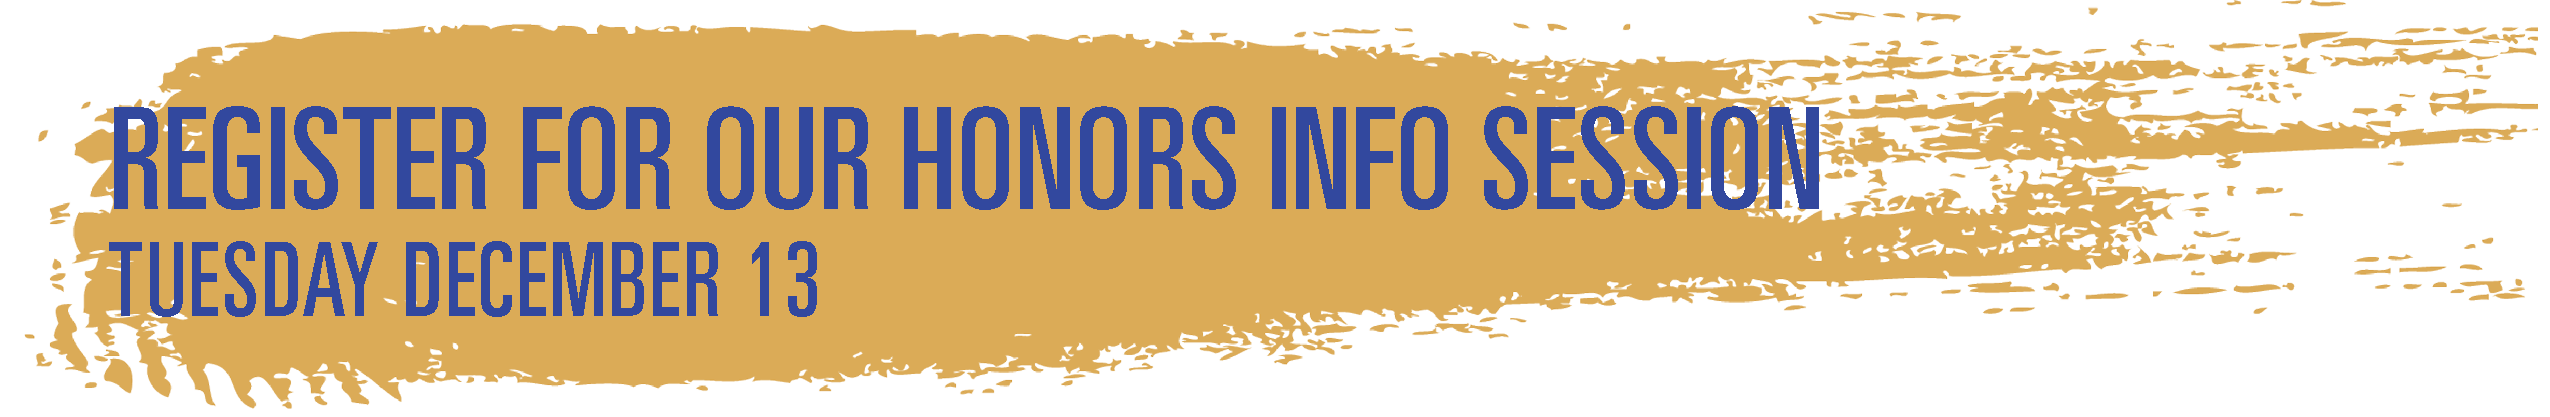 Register for our Honors Info Session; Tuesday December 13